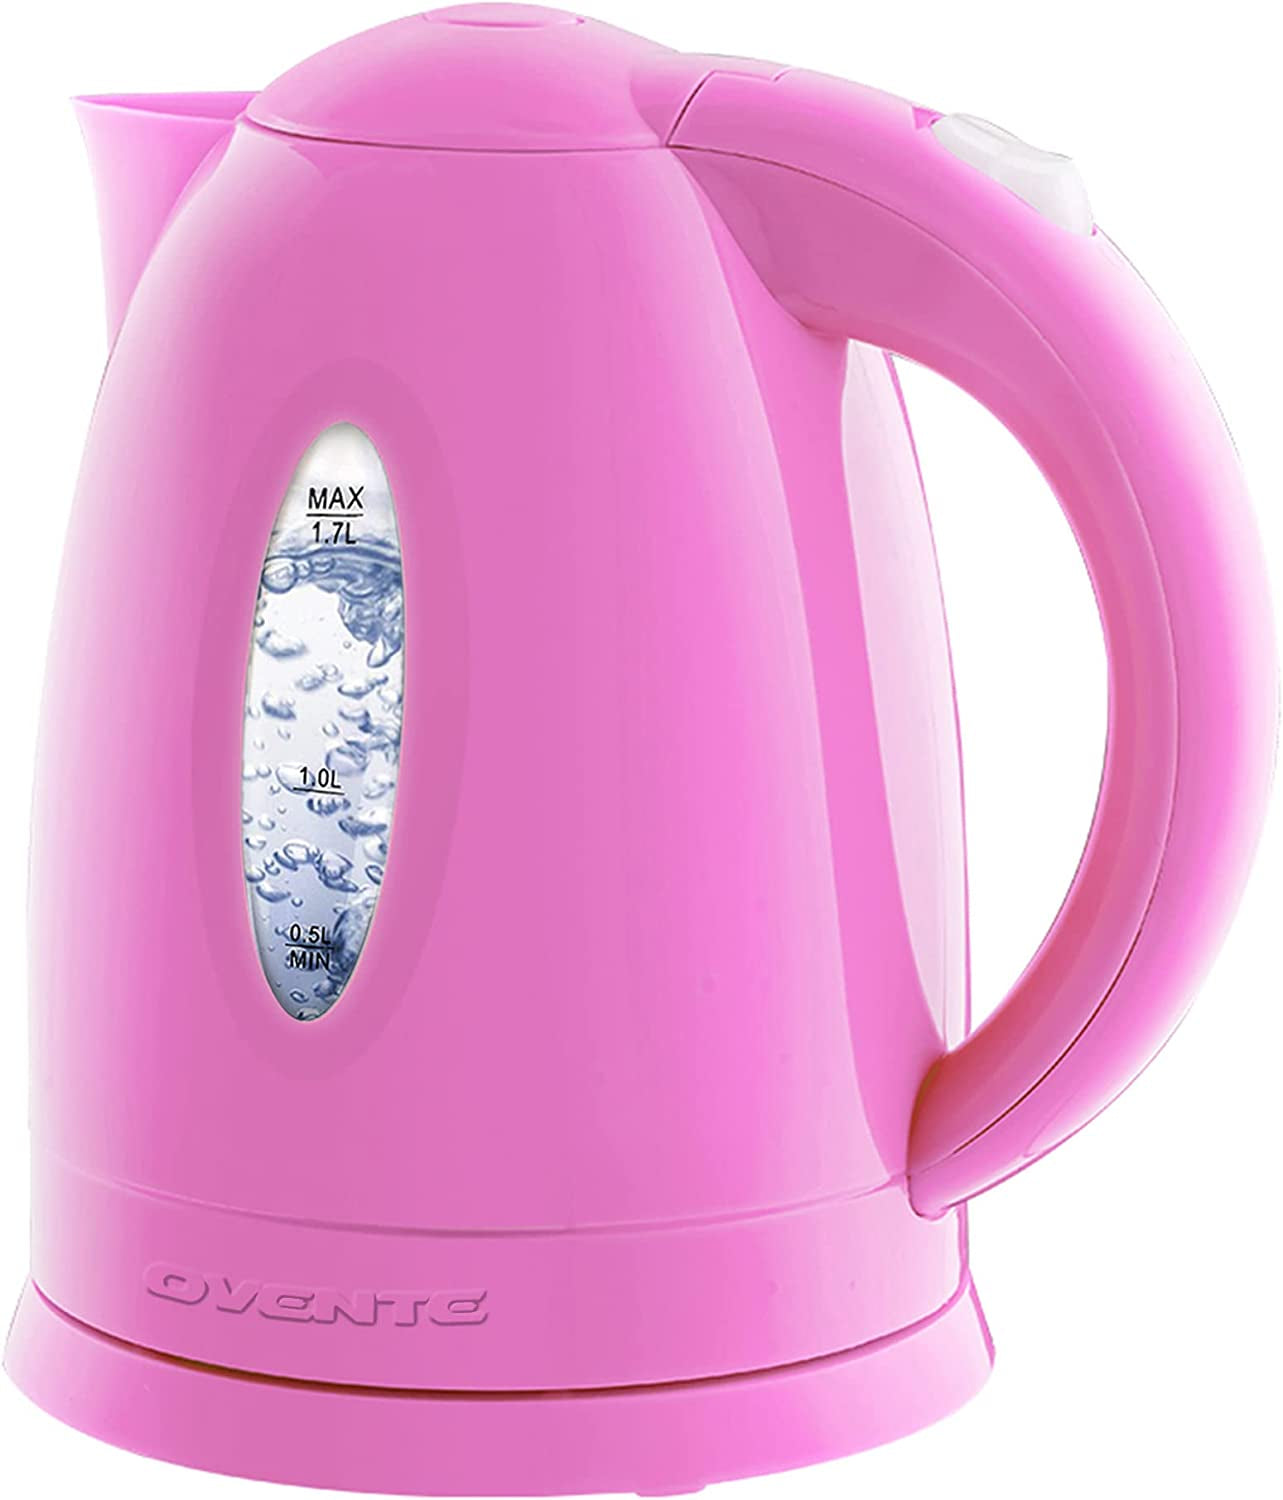 Electric Kettle 1.7 Liter Cordless Hot Water Boiler, 1100W with Automatic Shut-Off and Boil Dry Protection, Fast Boiling Bpa-Free Portable Instant Heater for Making Tea, Coffee